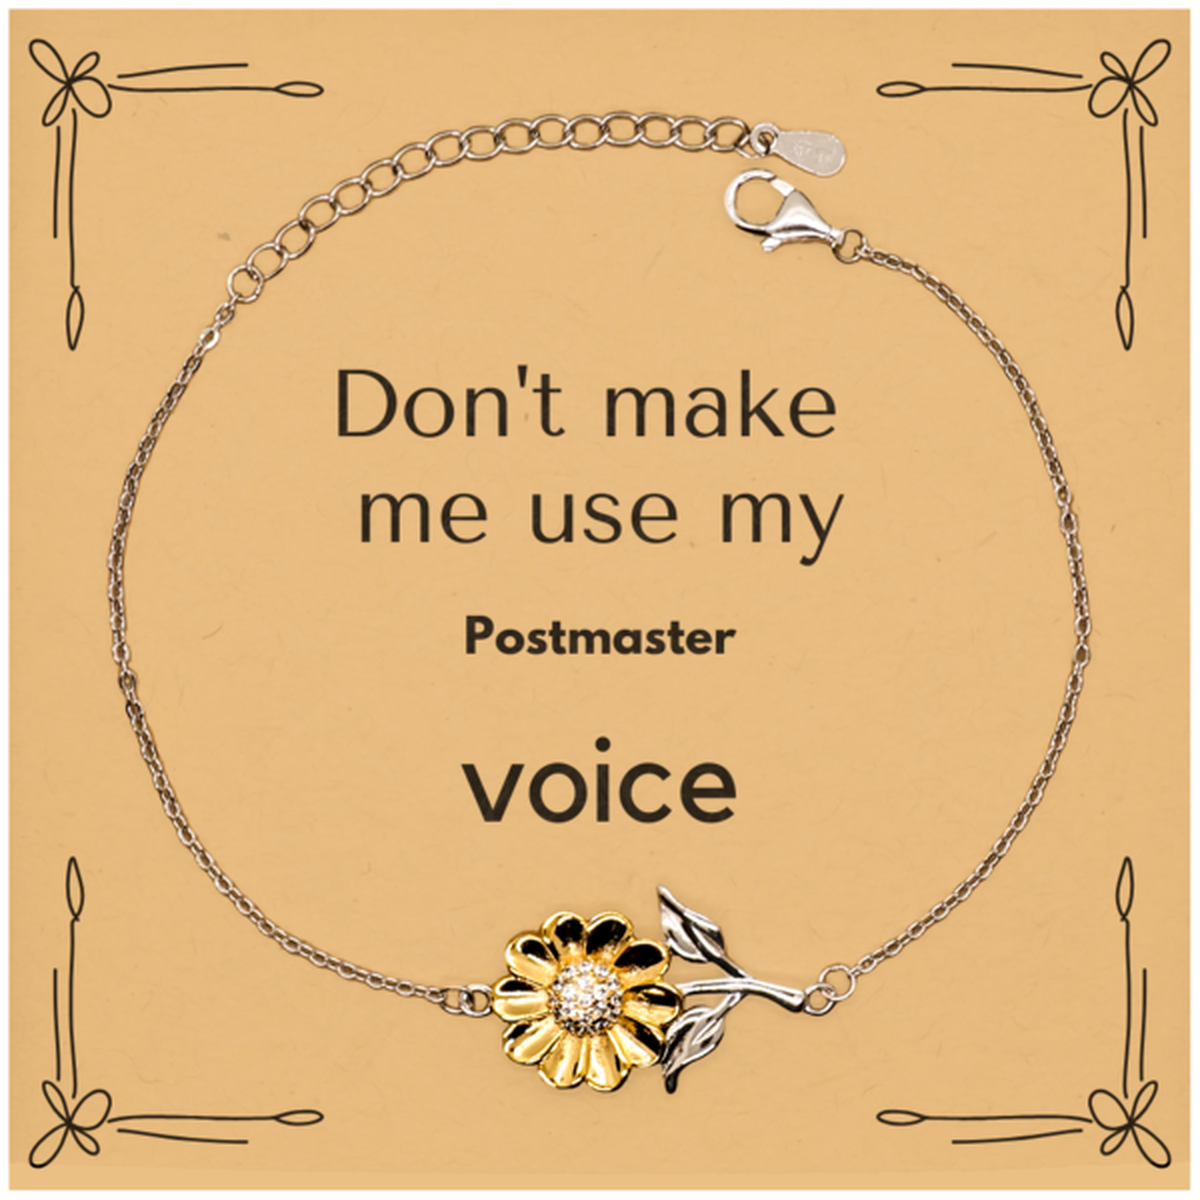 Don't make me use my Postmaster voice, Sarcasm Postmaster Card Gifts, Christmas Postmaster Sunflower Bracelet Birthday Unique Gifts For Postmaster Coworkers, Men, Women, Colleague, Friends